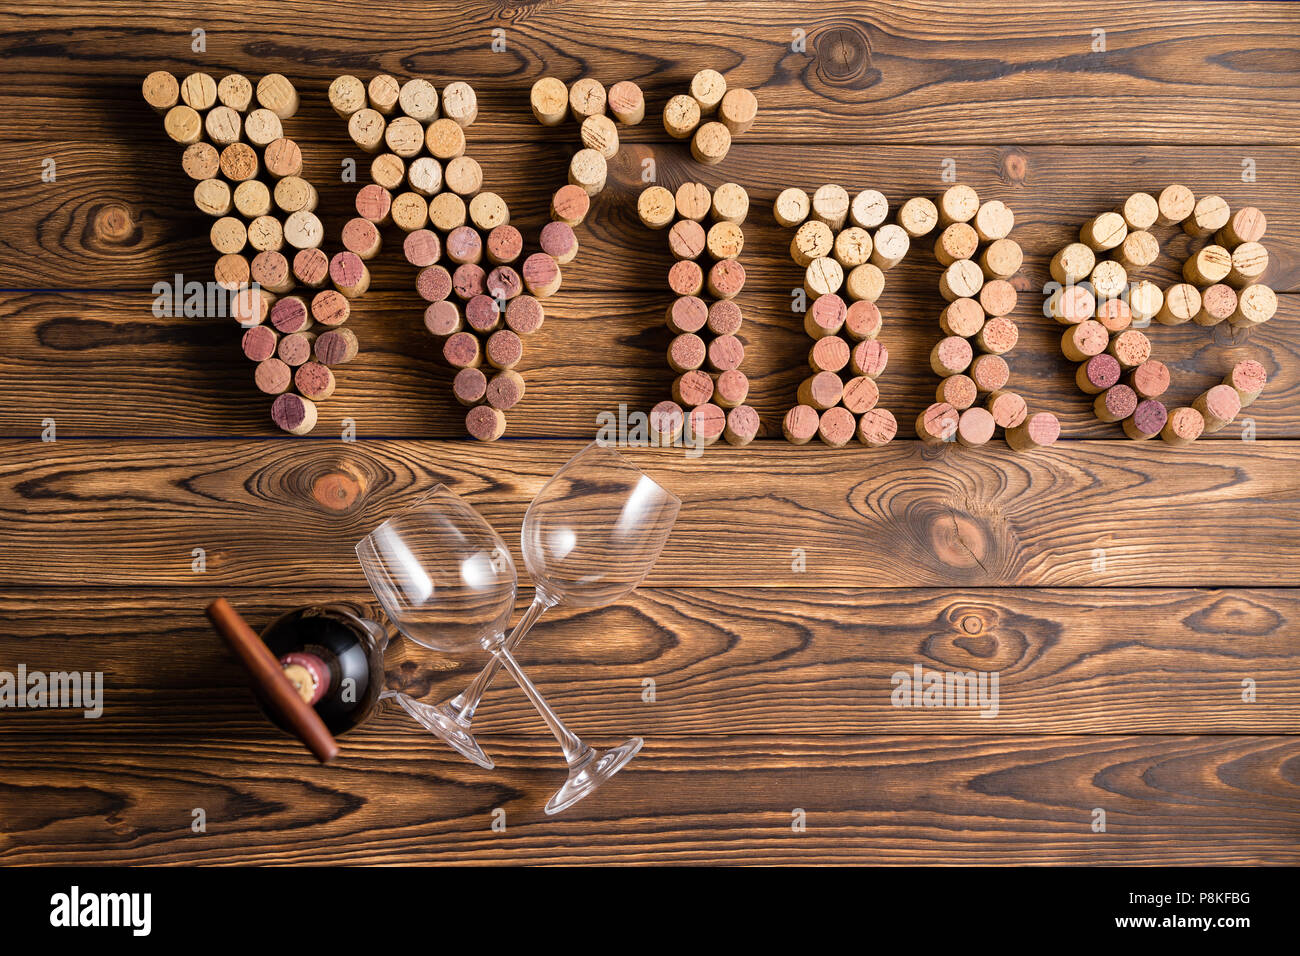 Corks arranged in wine lettering with two glasses and bottle against wooden background Stock Photo